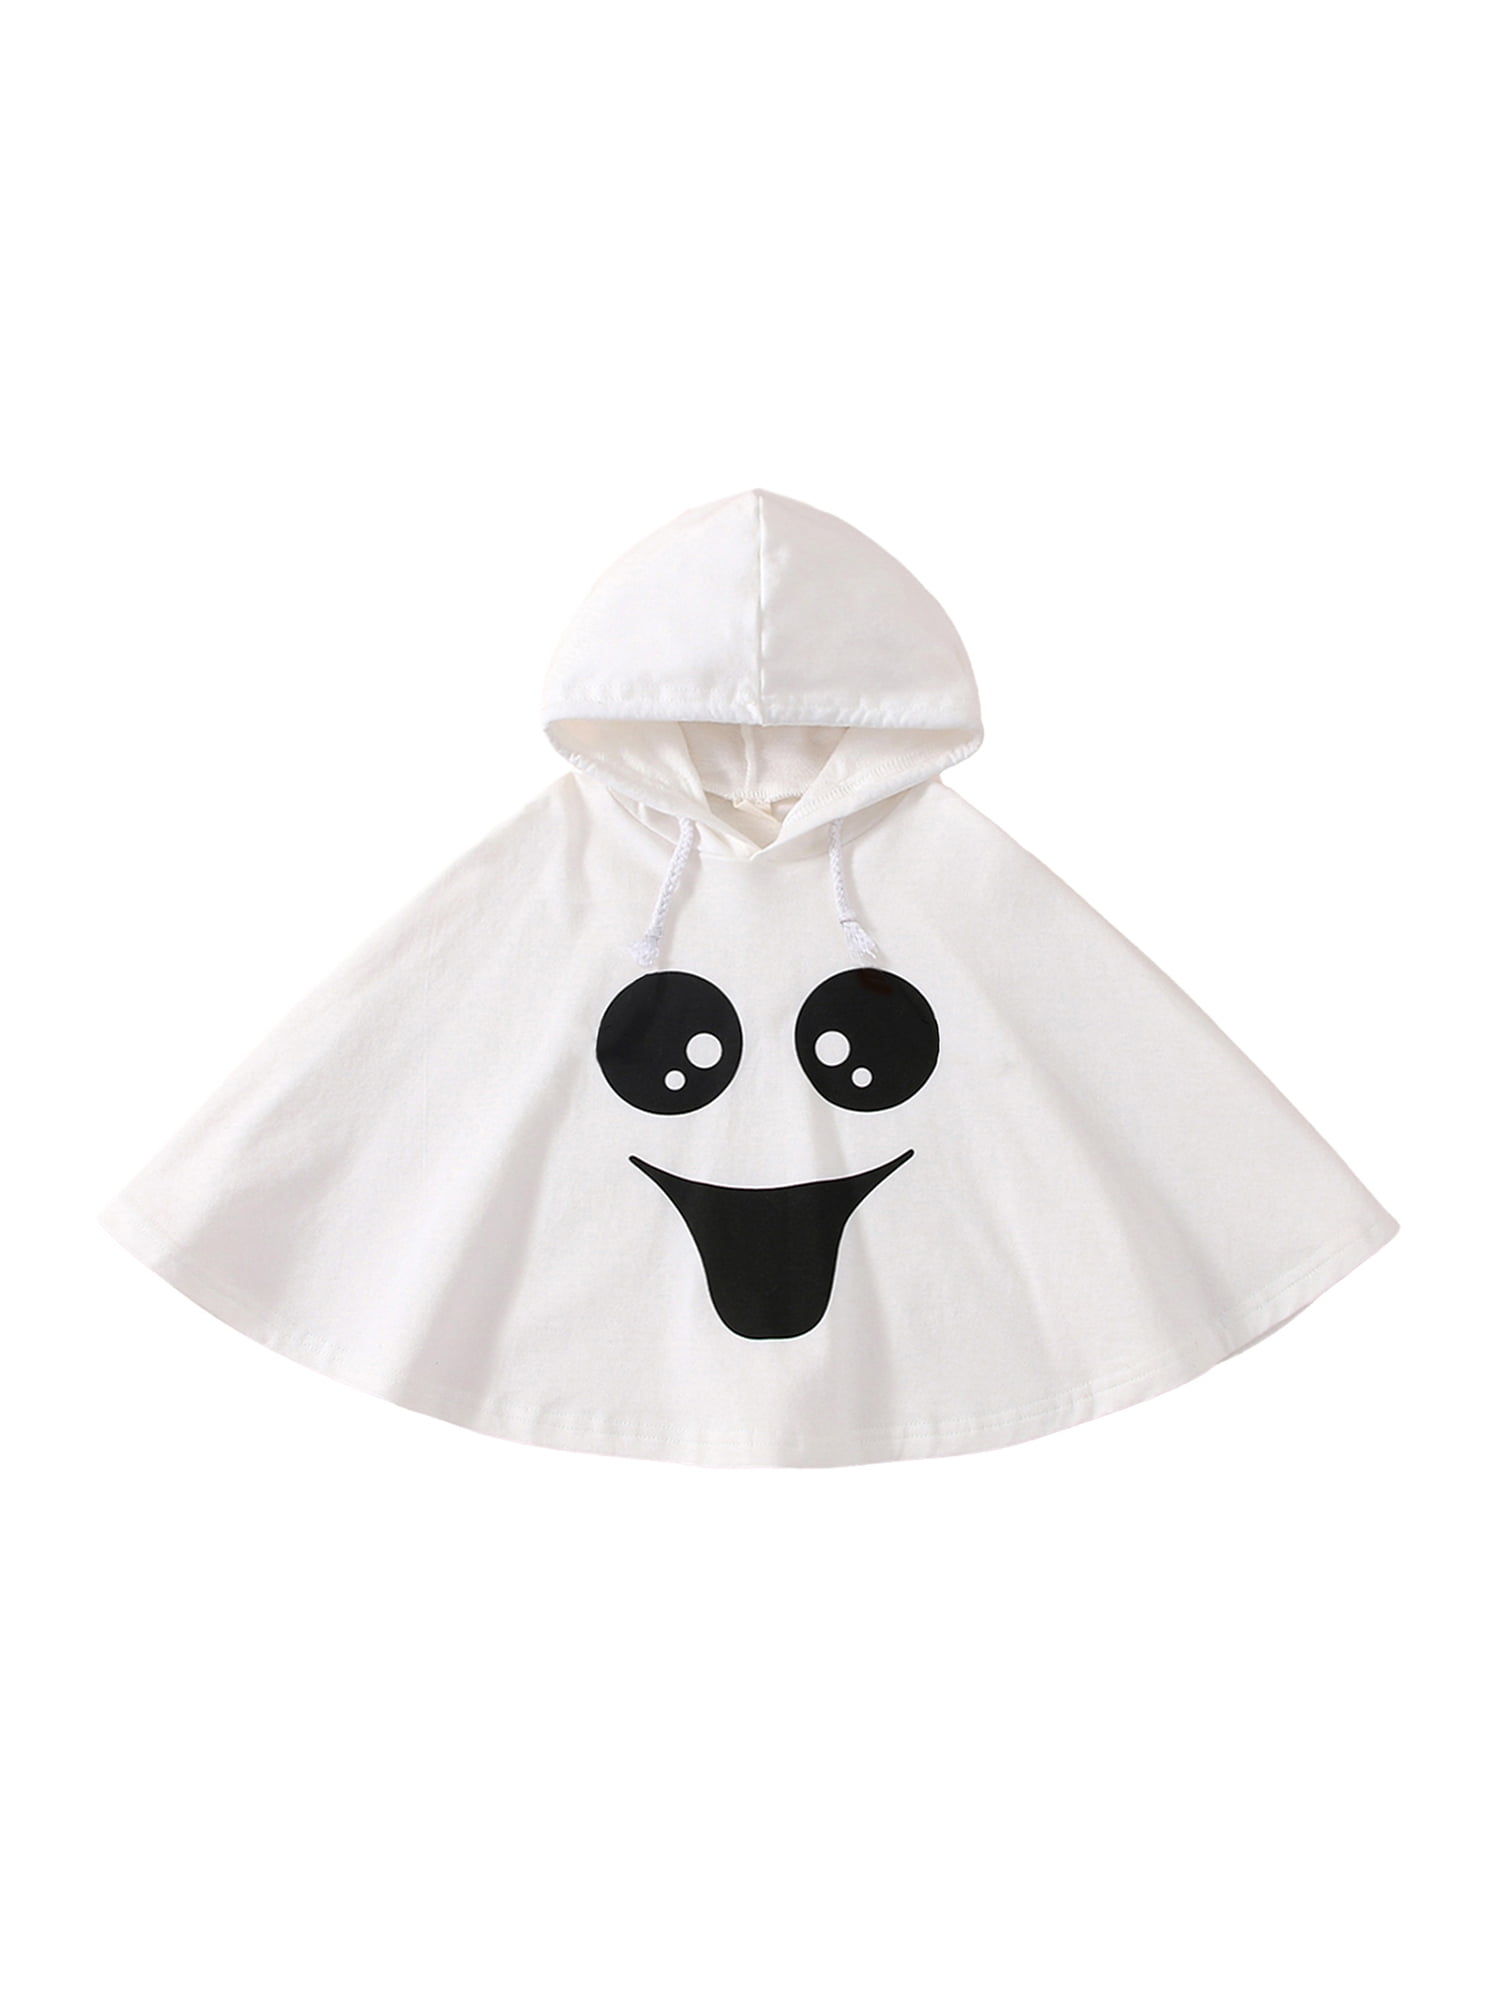 Singcoco Baby Halloween Costume Outfit Toddler Boy Girl Long Robe Cloak 